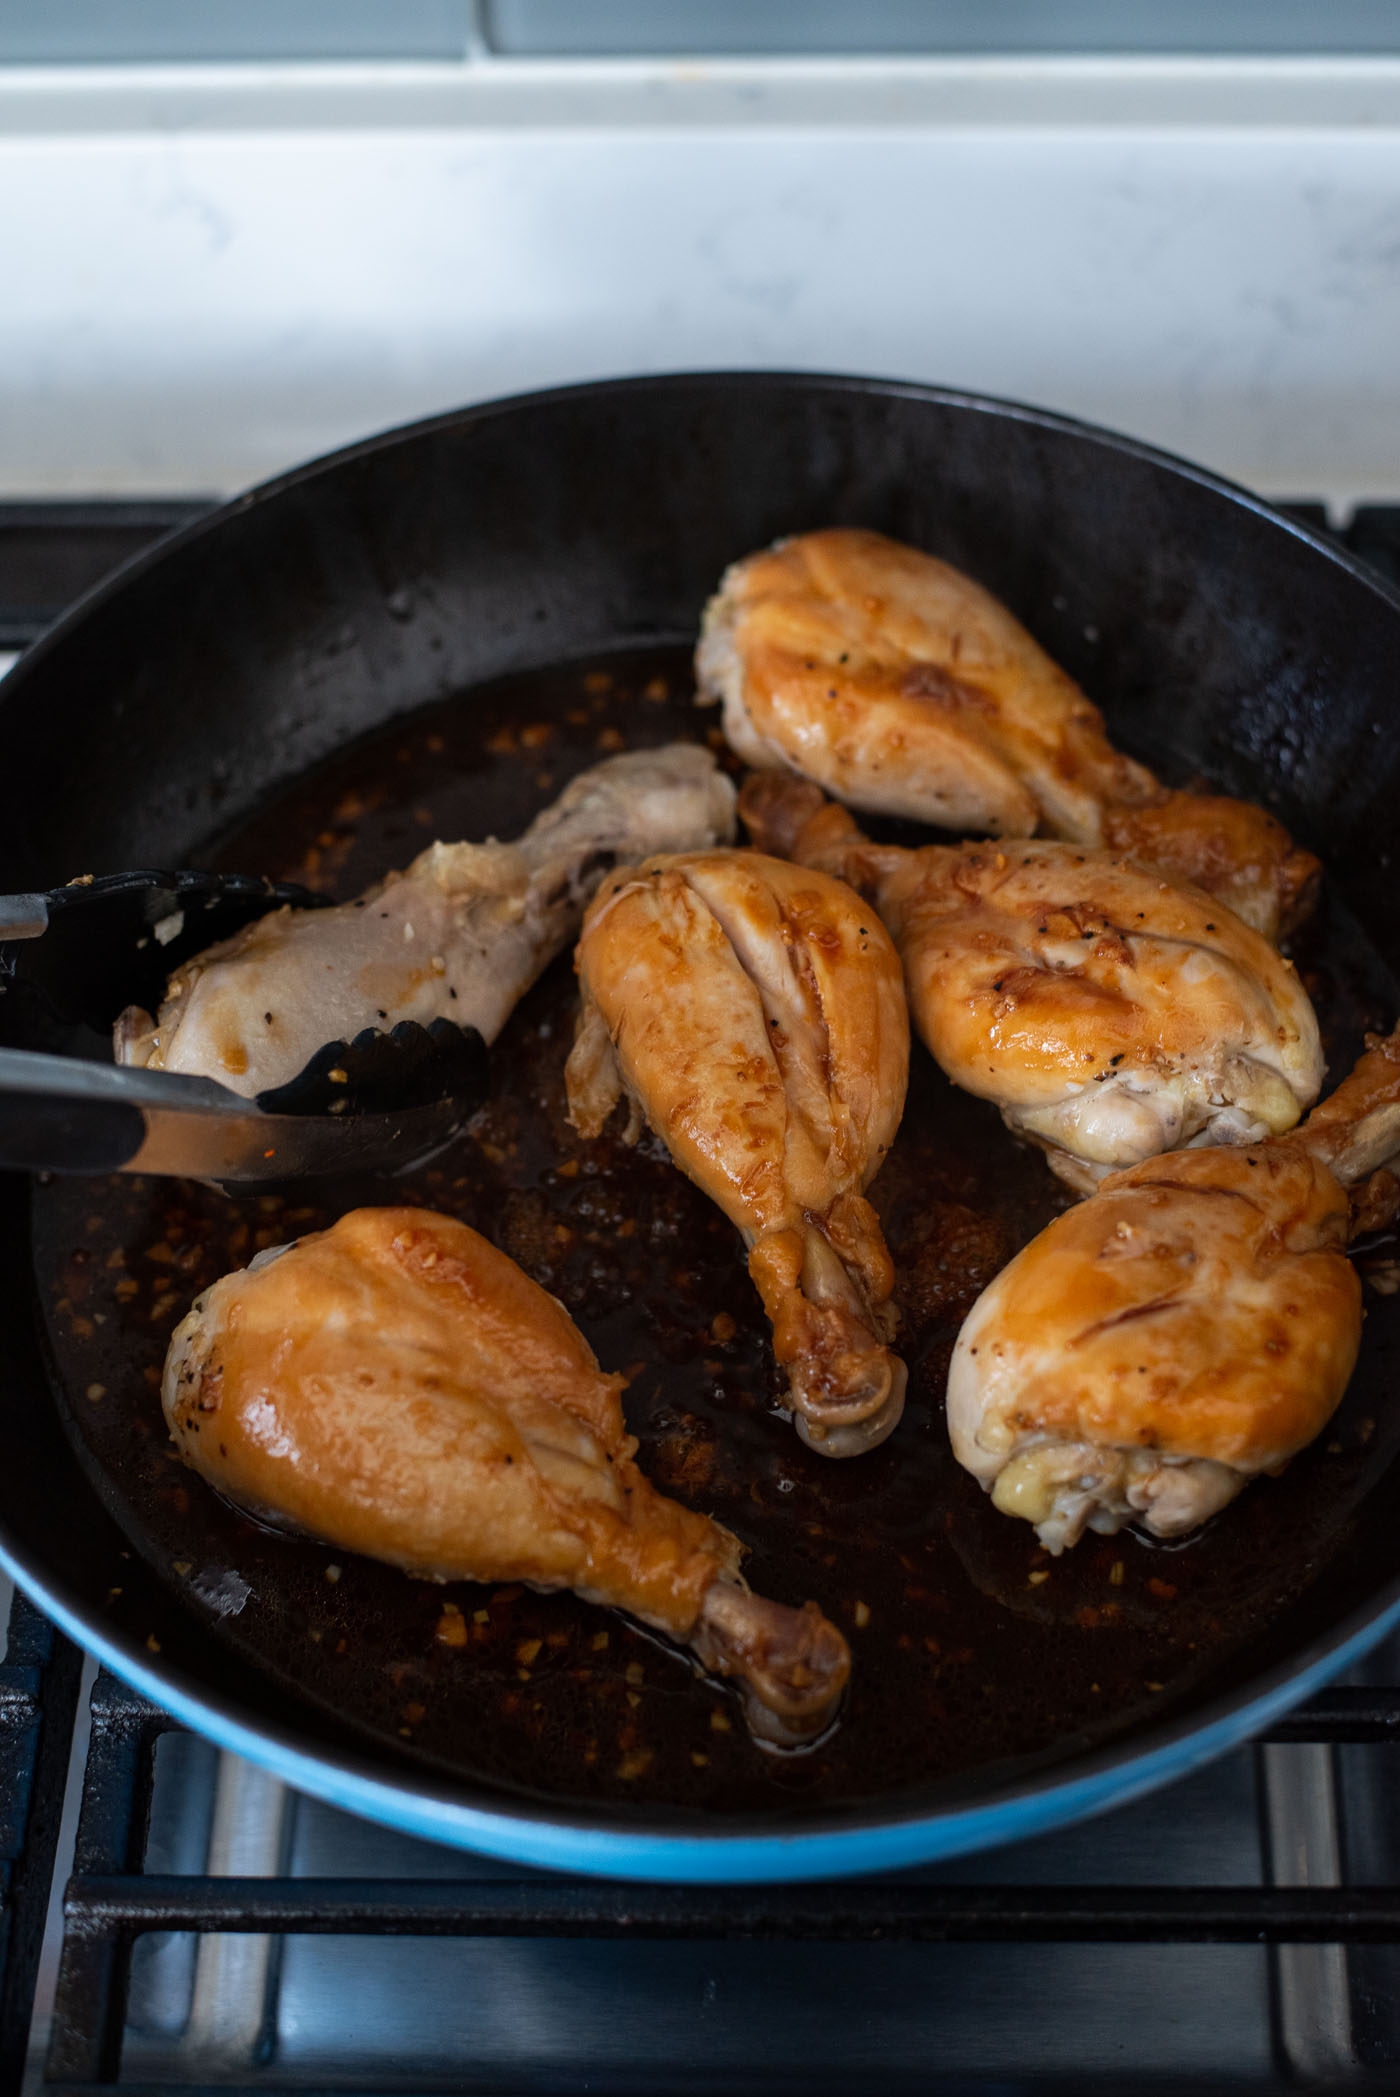 Turn the chicken drumsticks to the other side with kitchen tongs